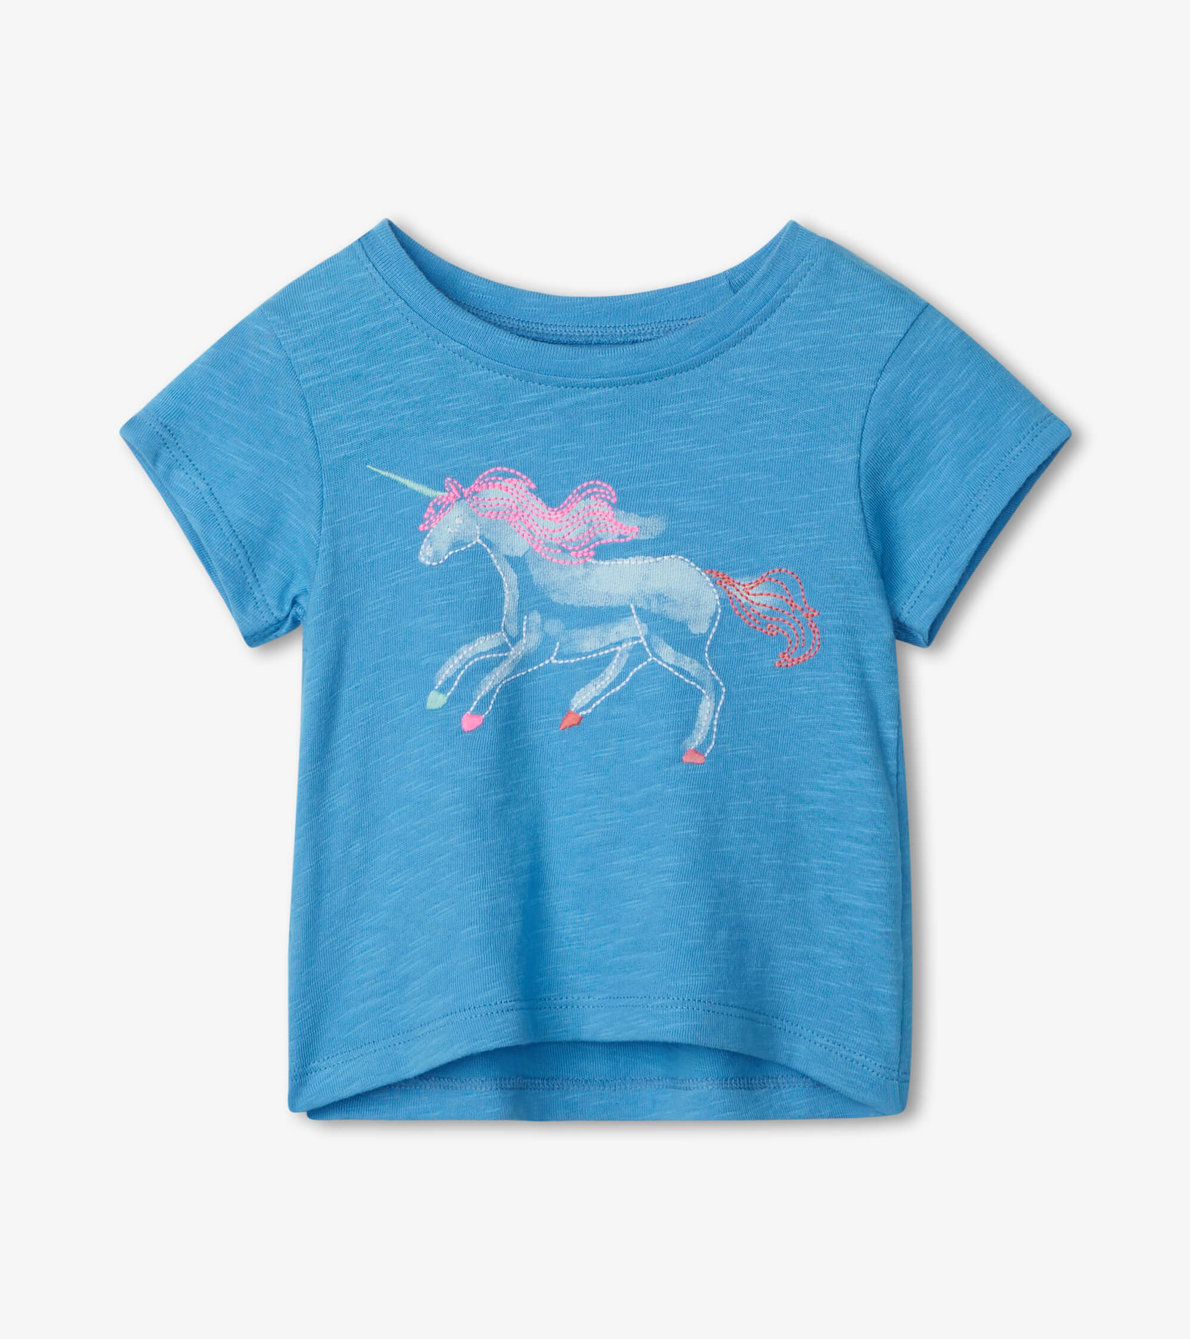 View larger image of Magical Unicorn Baby Tee